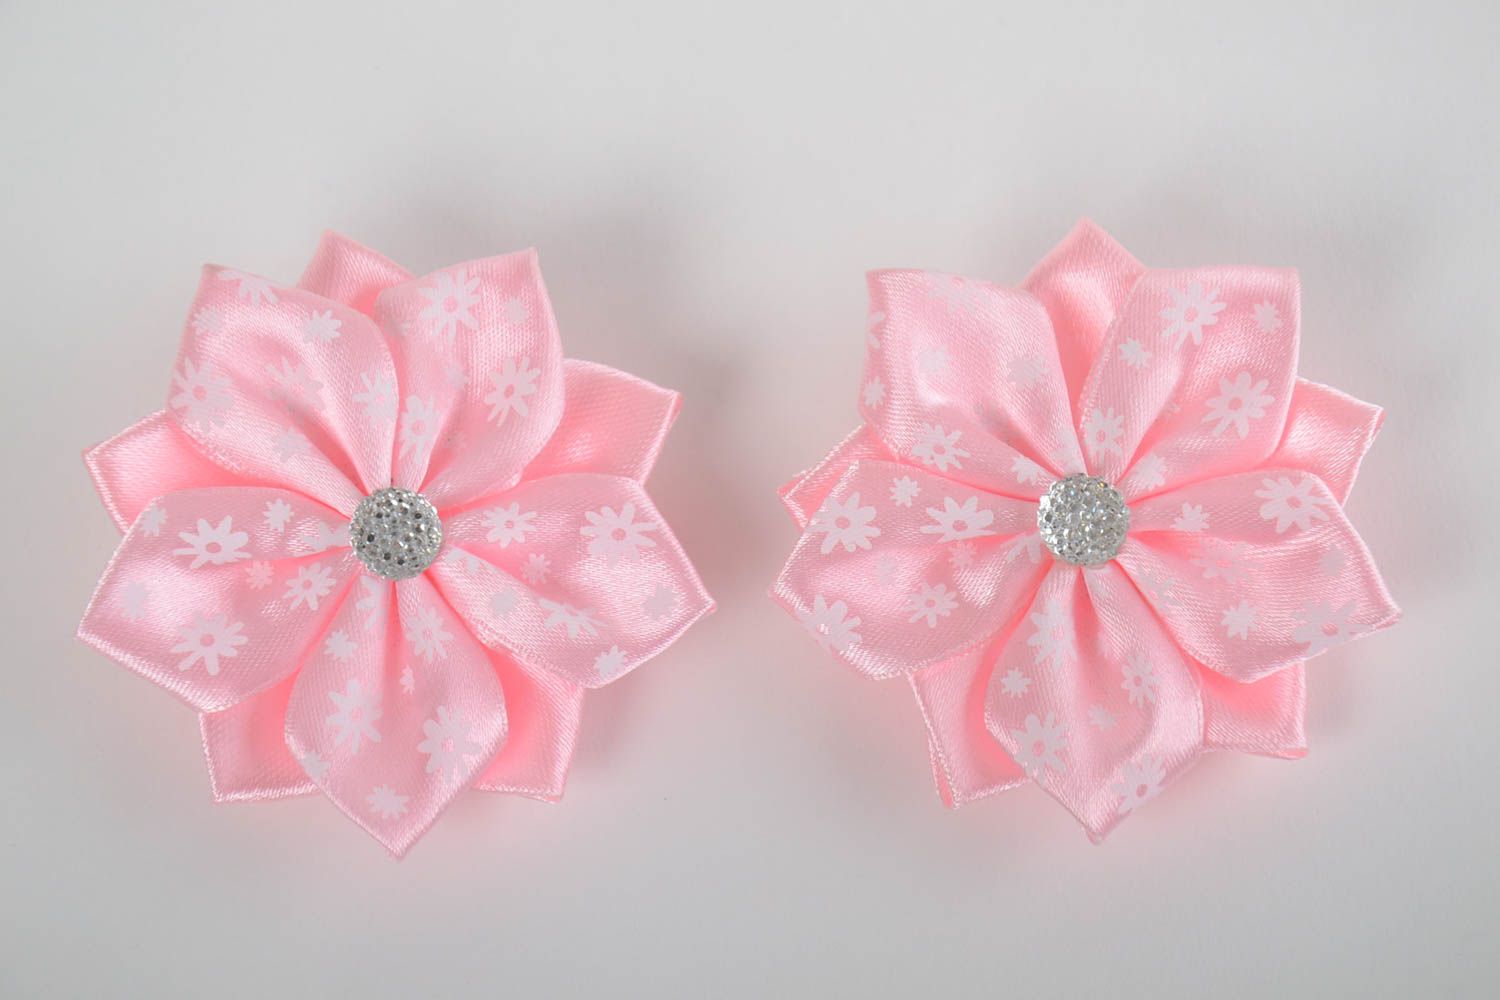 Handmade pink hair clips made of satin ribbons for kids 2 pieces photo 2